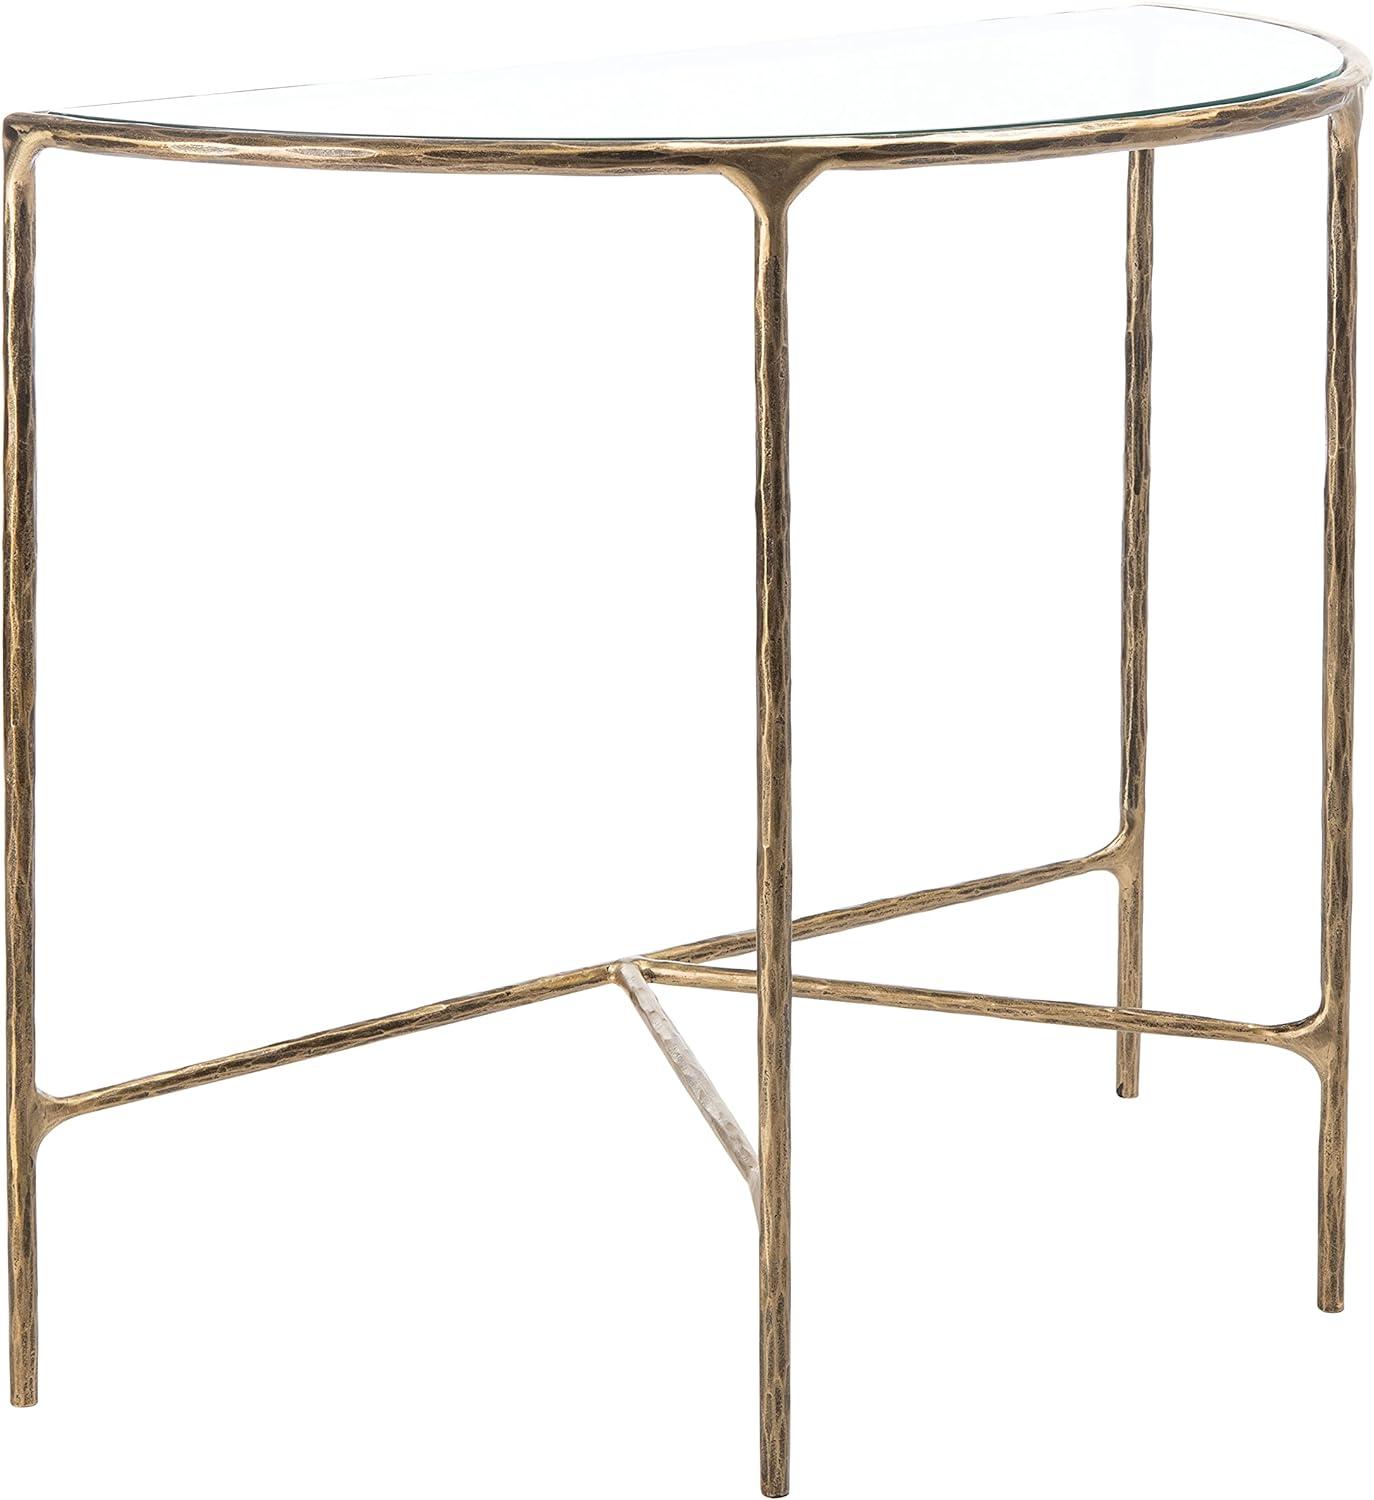 Aristocratic Brass Demilune Console Table with Sleek Glass Top